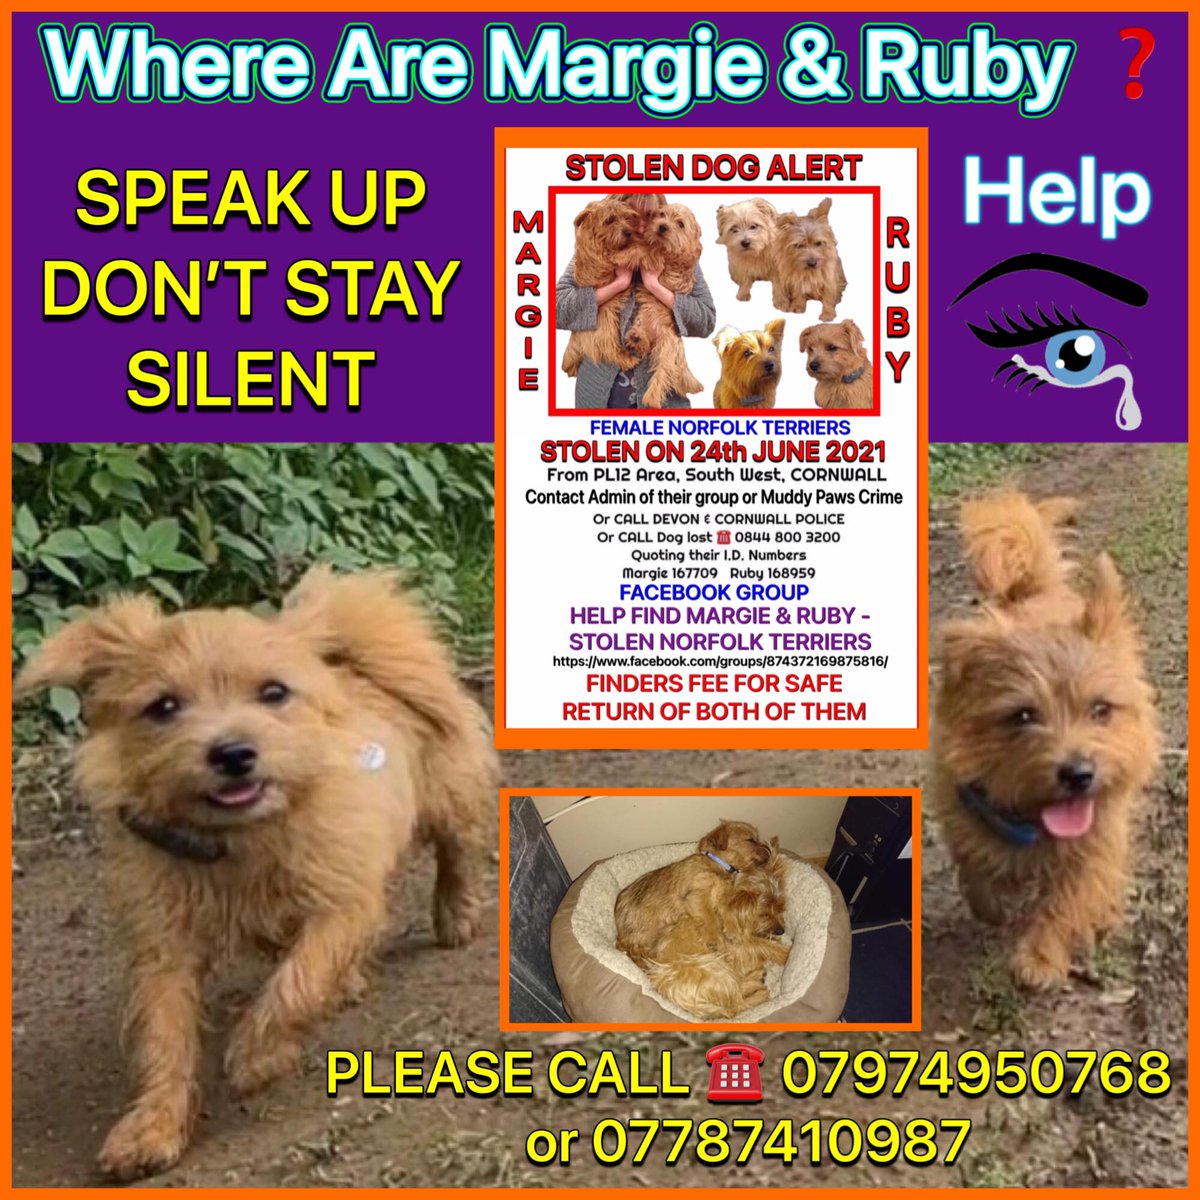 STILL 💥 MISSING Where are Margie and Ruby? #margieandrubymonday - every Monday, all day Monday ... JOIN IN #StolenMargieandRuby #FindMargieRuby #missingdog x2 #stolendog x2 @FindMargieruby please share 👇👇👇